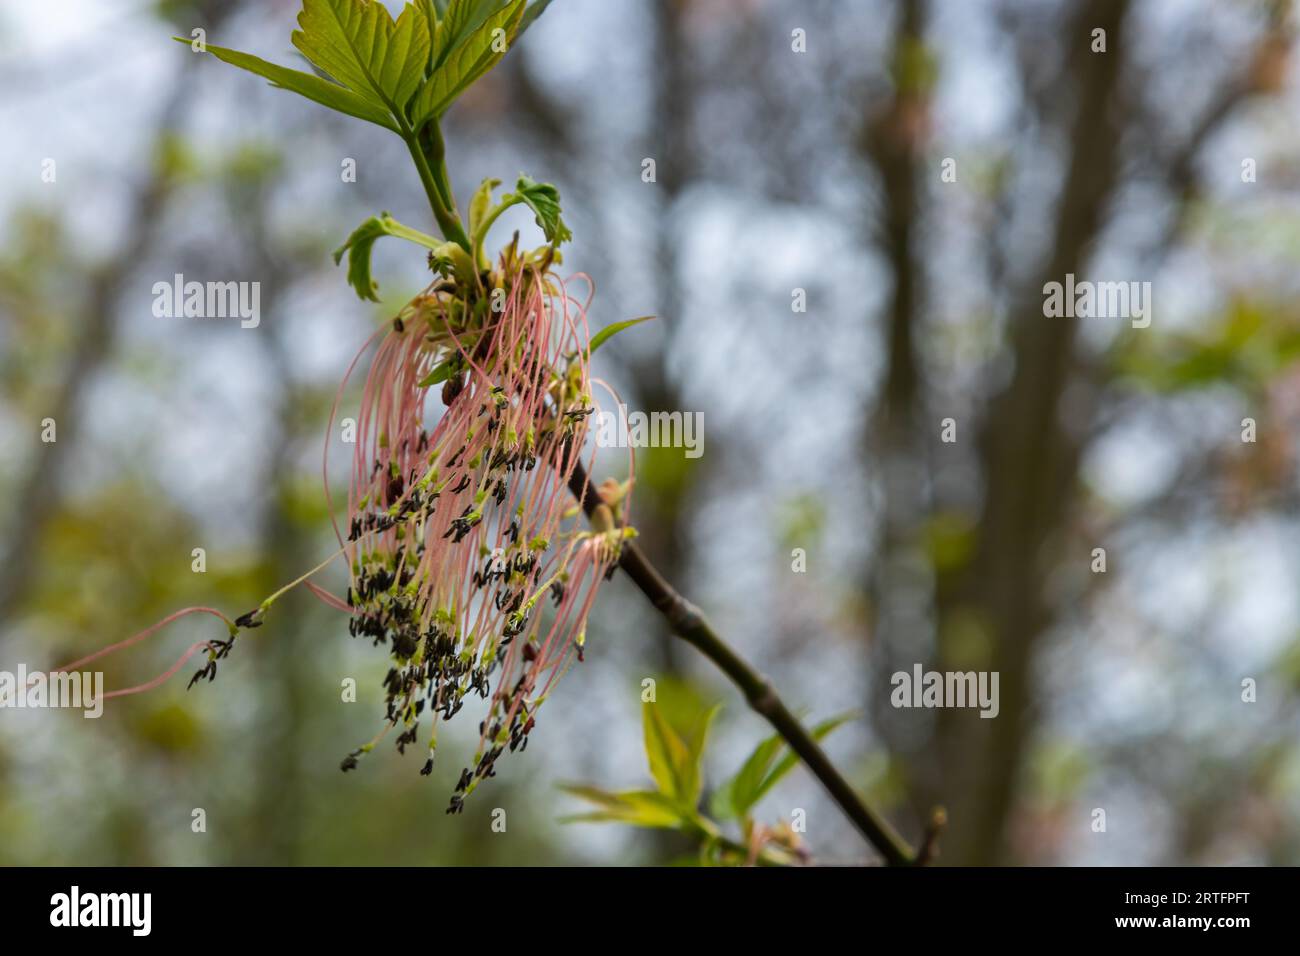 The ash-leaved maple Acer negundo flowers in early spring, sunny day and natural environment, blurred background. Stock Photo